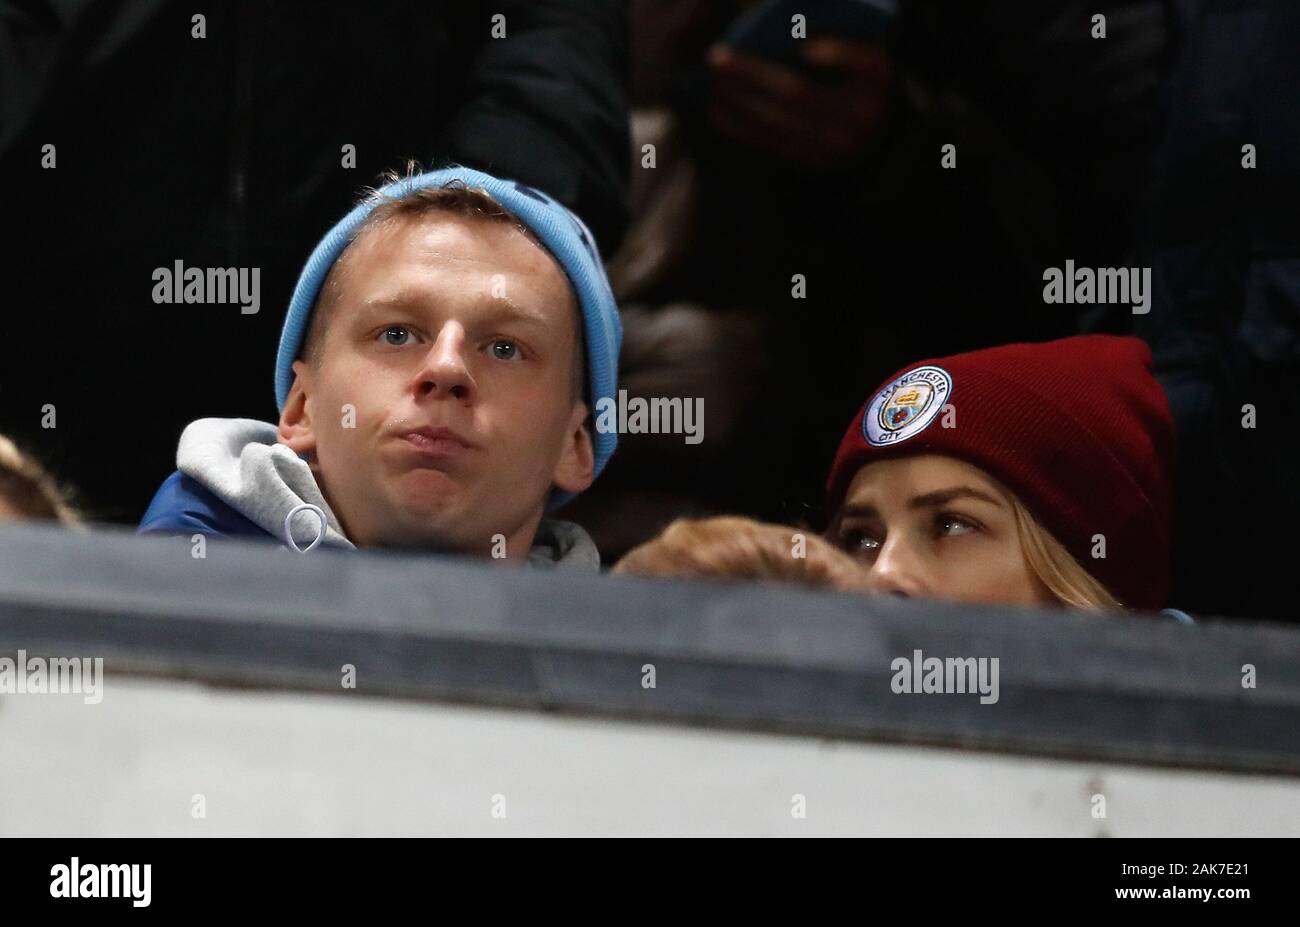 Manchester City's Oleksandr Zinchenko with girlfriend Vlada Sedan in the stands with the Manchester City fans during the Carabao Cup semi final first leg match at Old Trafford, Manchester. Stock Photo